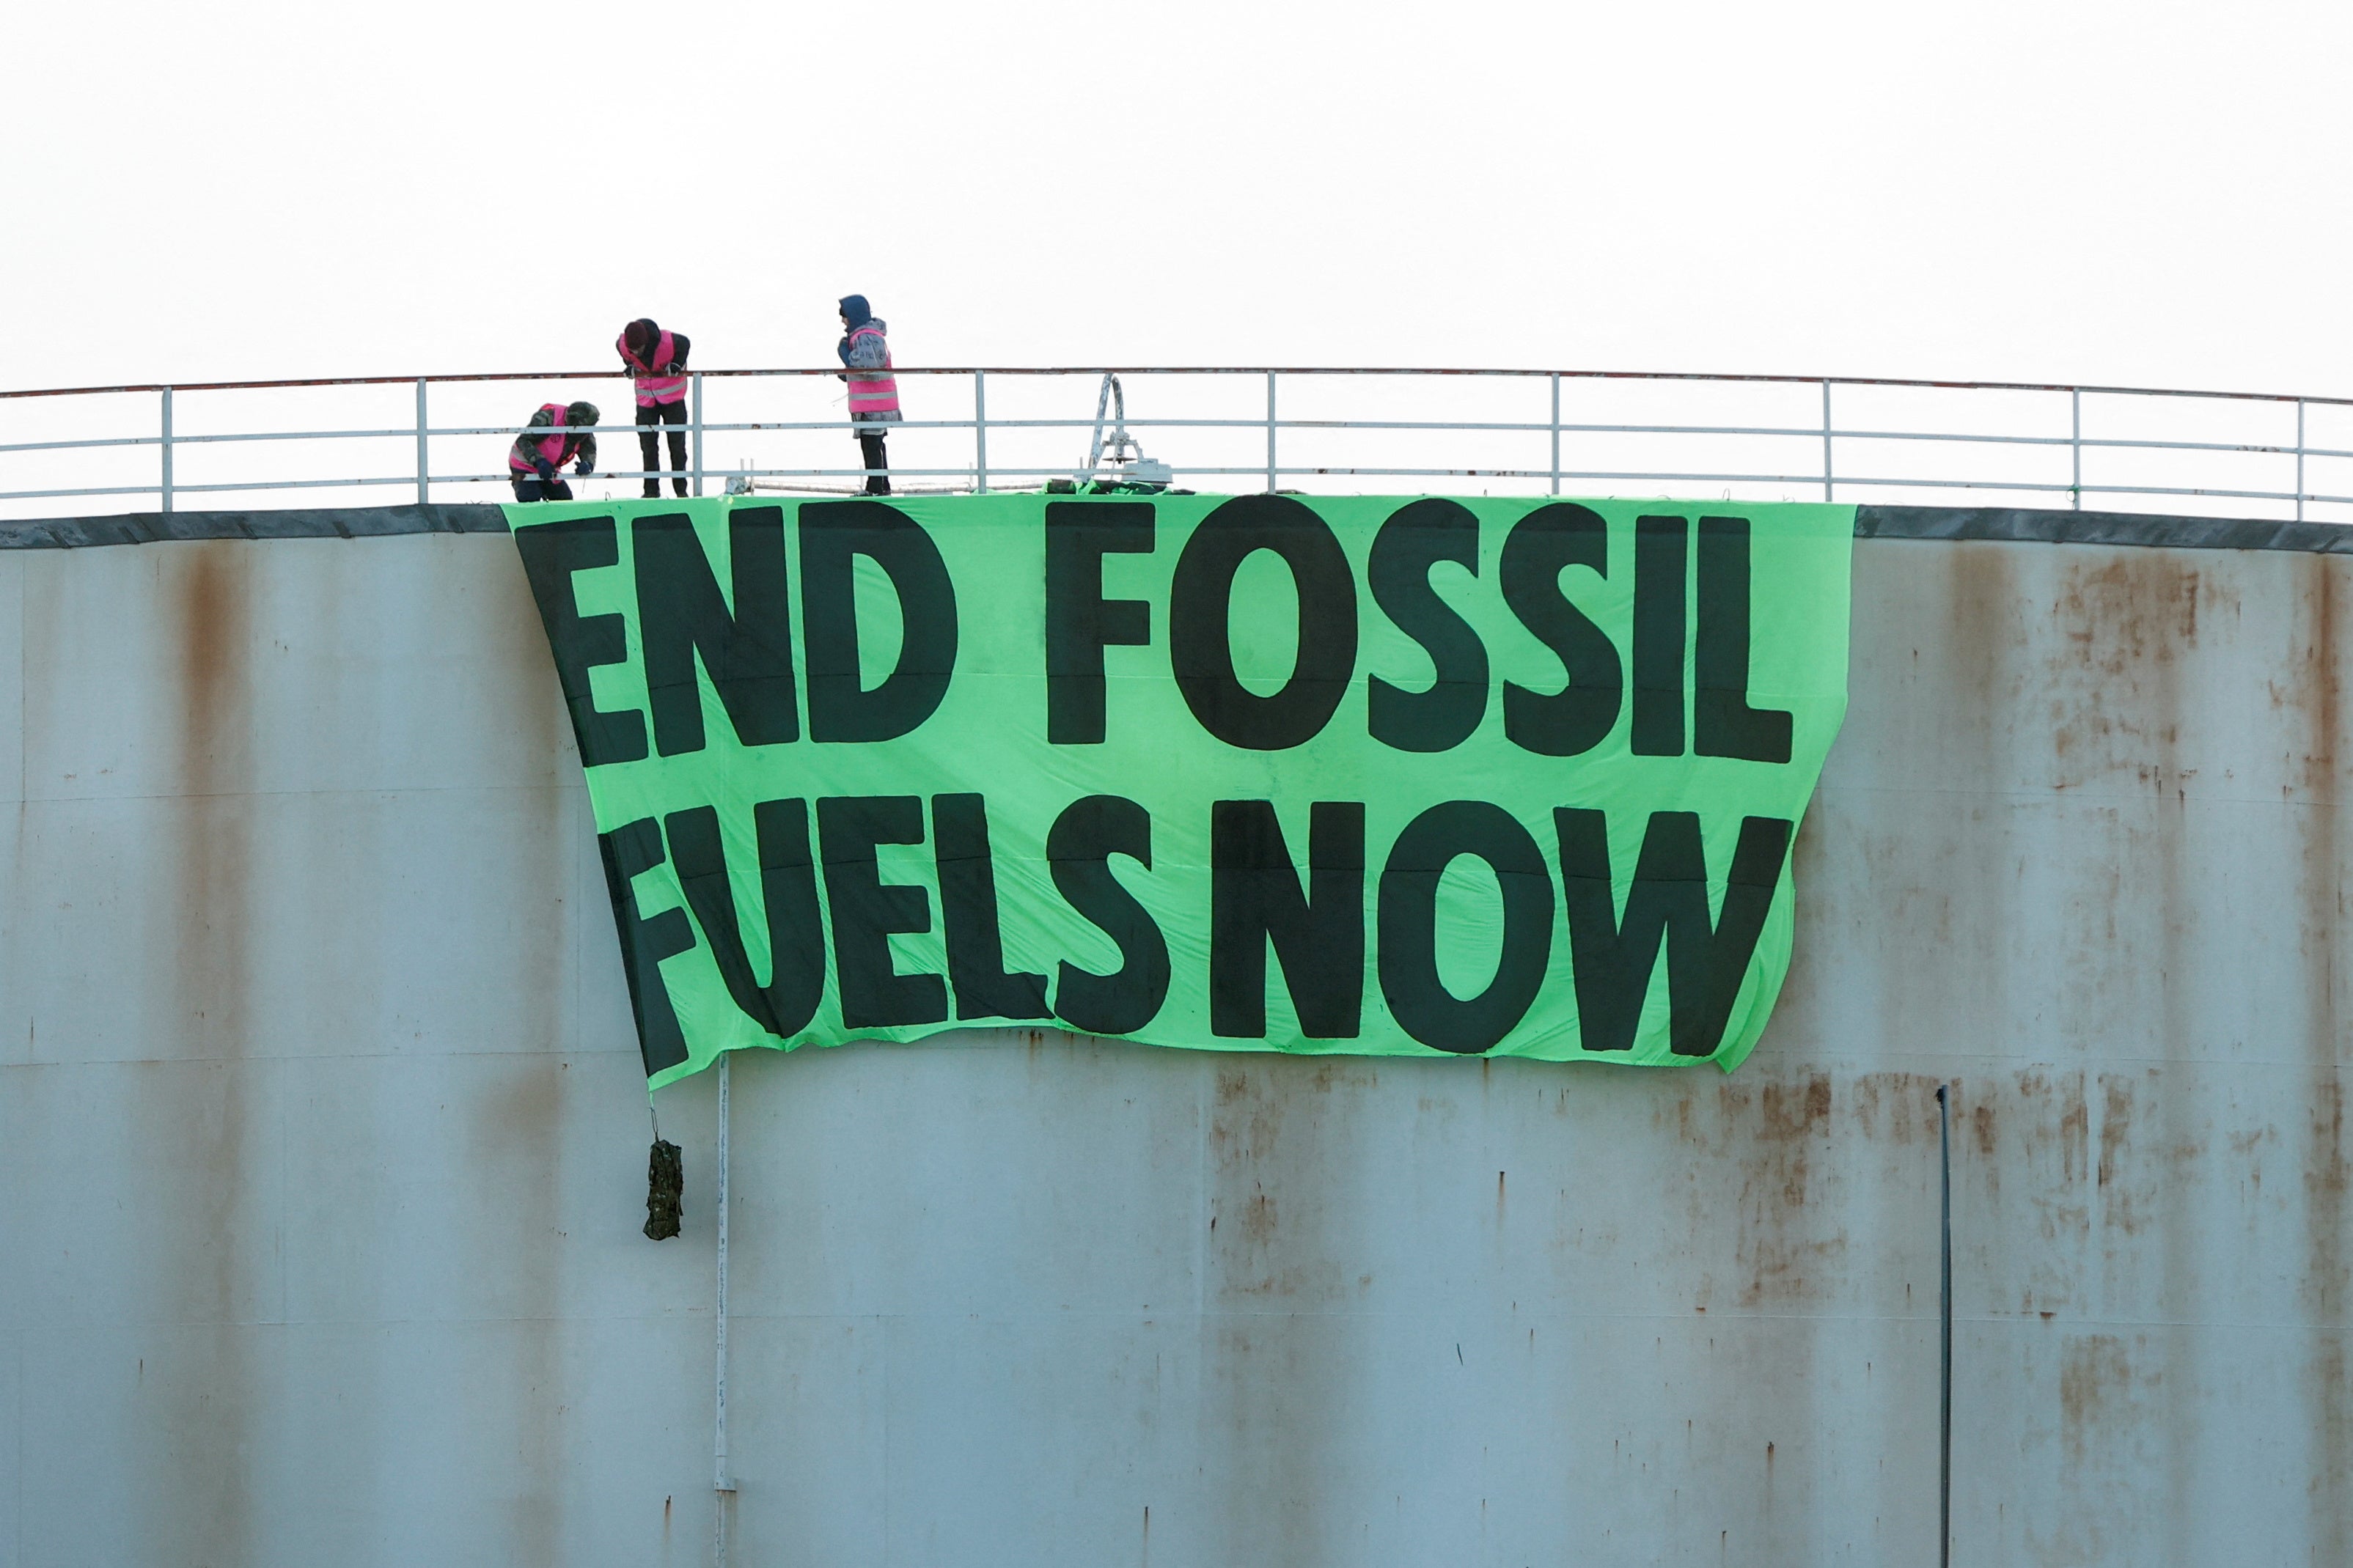 Extinction Rebellion activists protest at an Esso storage tank in London.